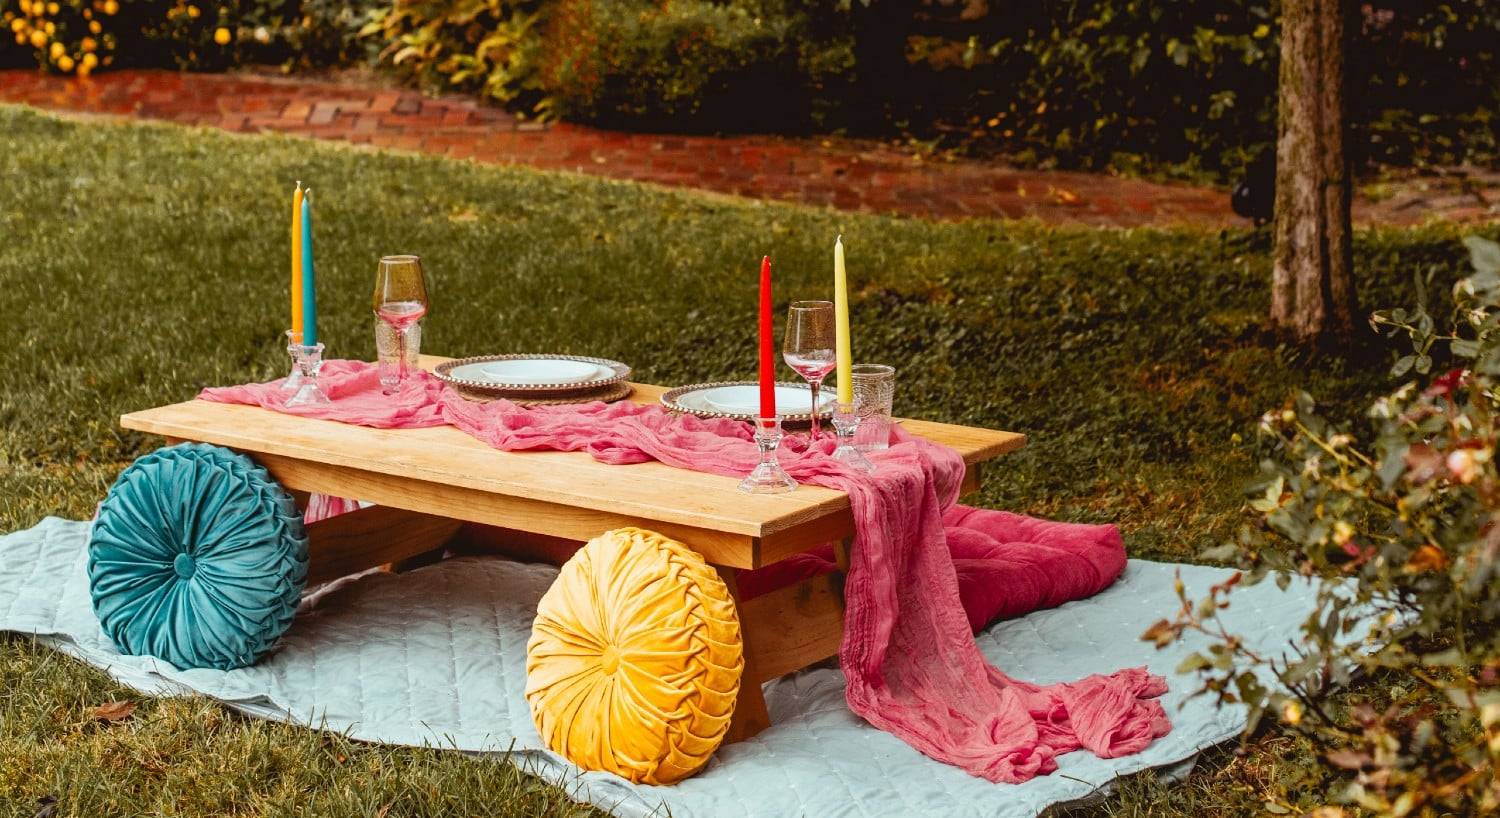 A small outdoor table for two set on a blanket on the grass with colorful pillows